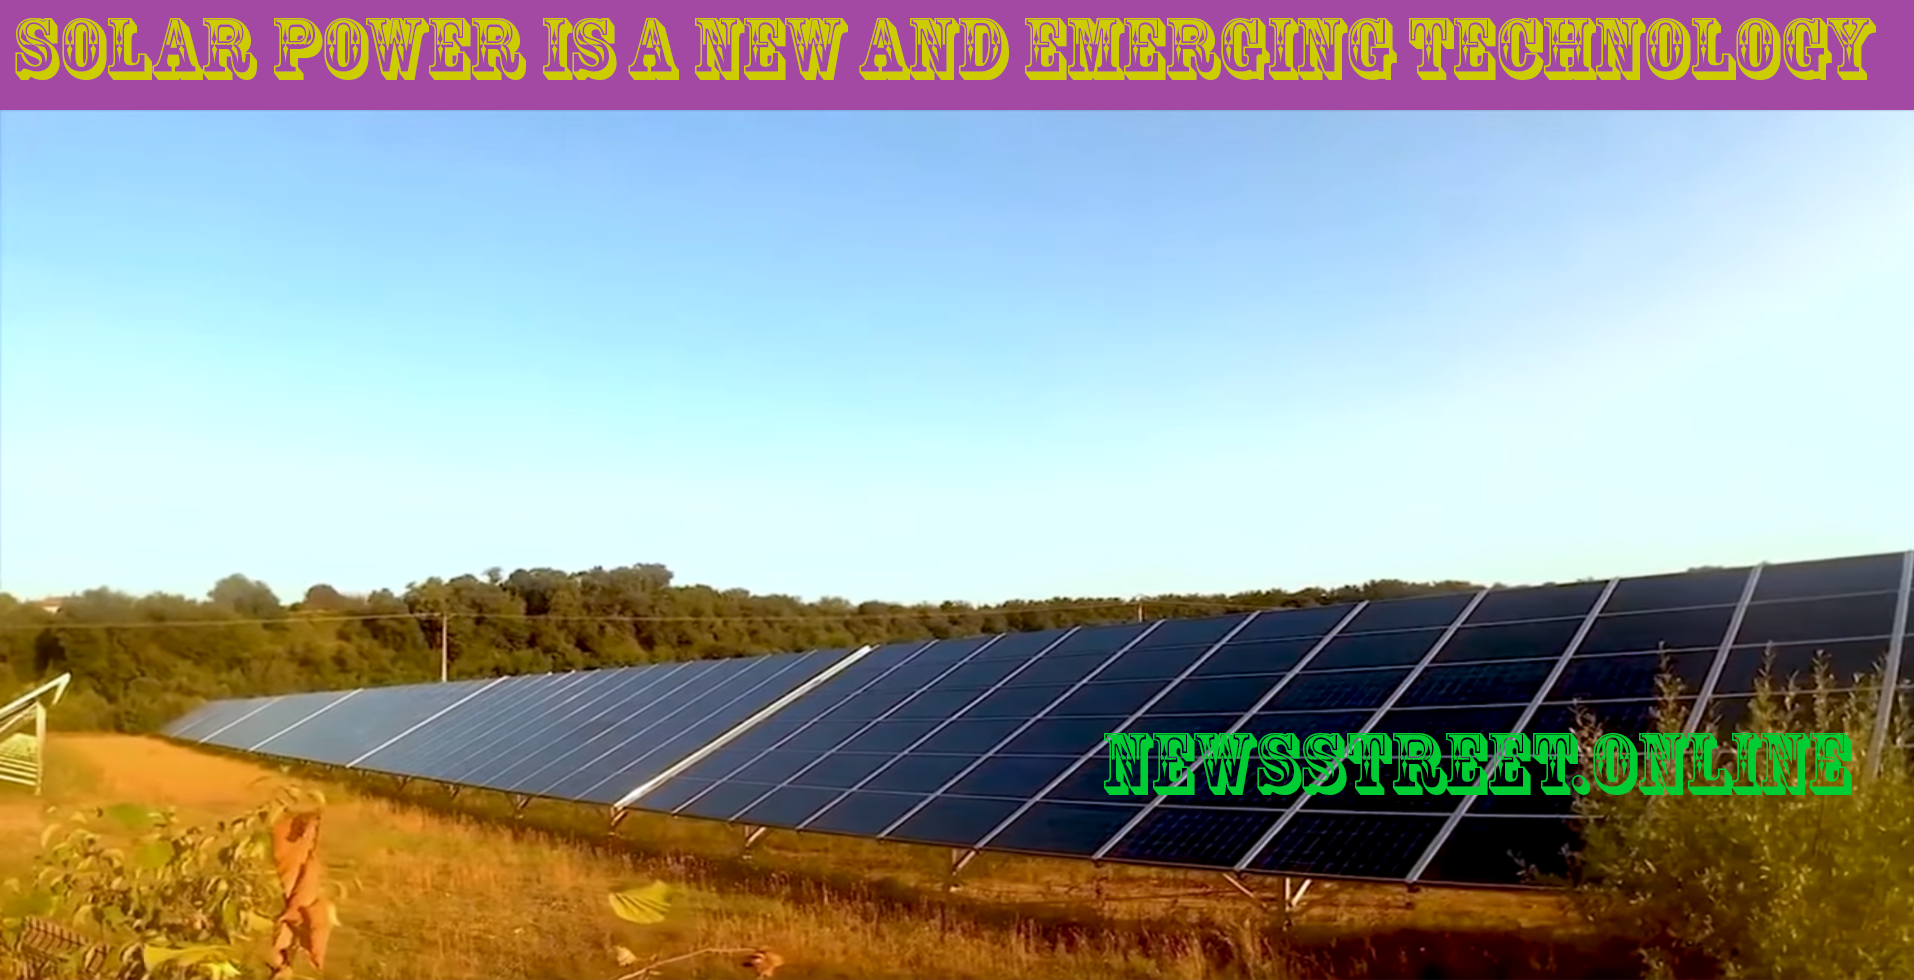 Solar Power is a new and emerging technology